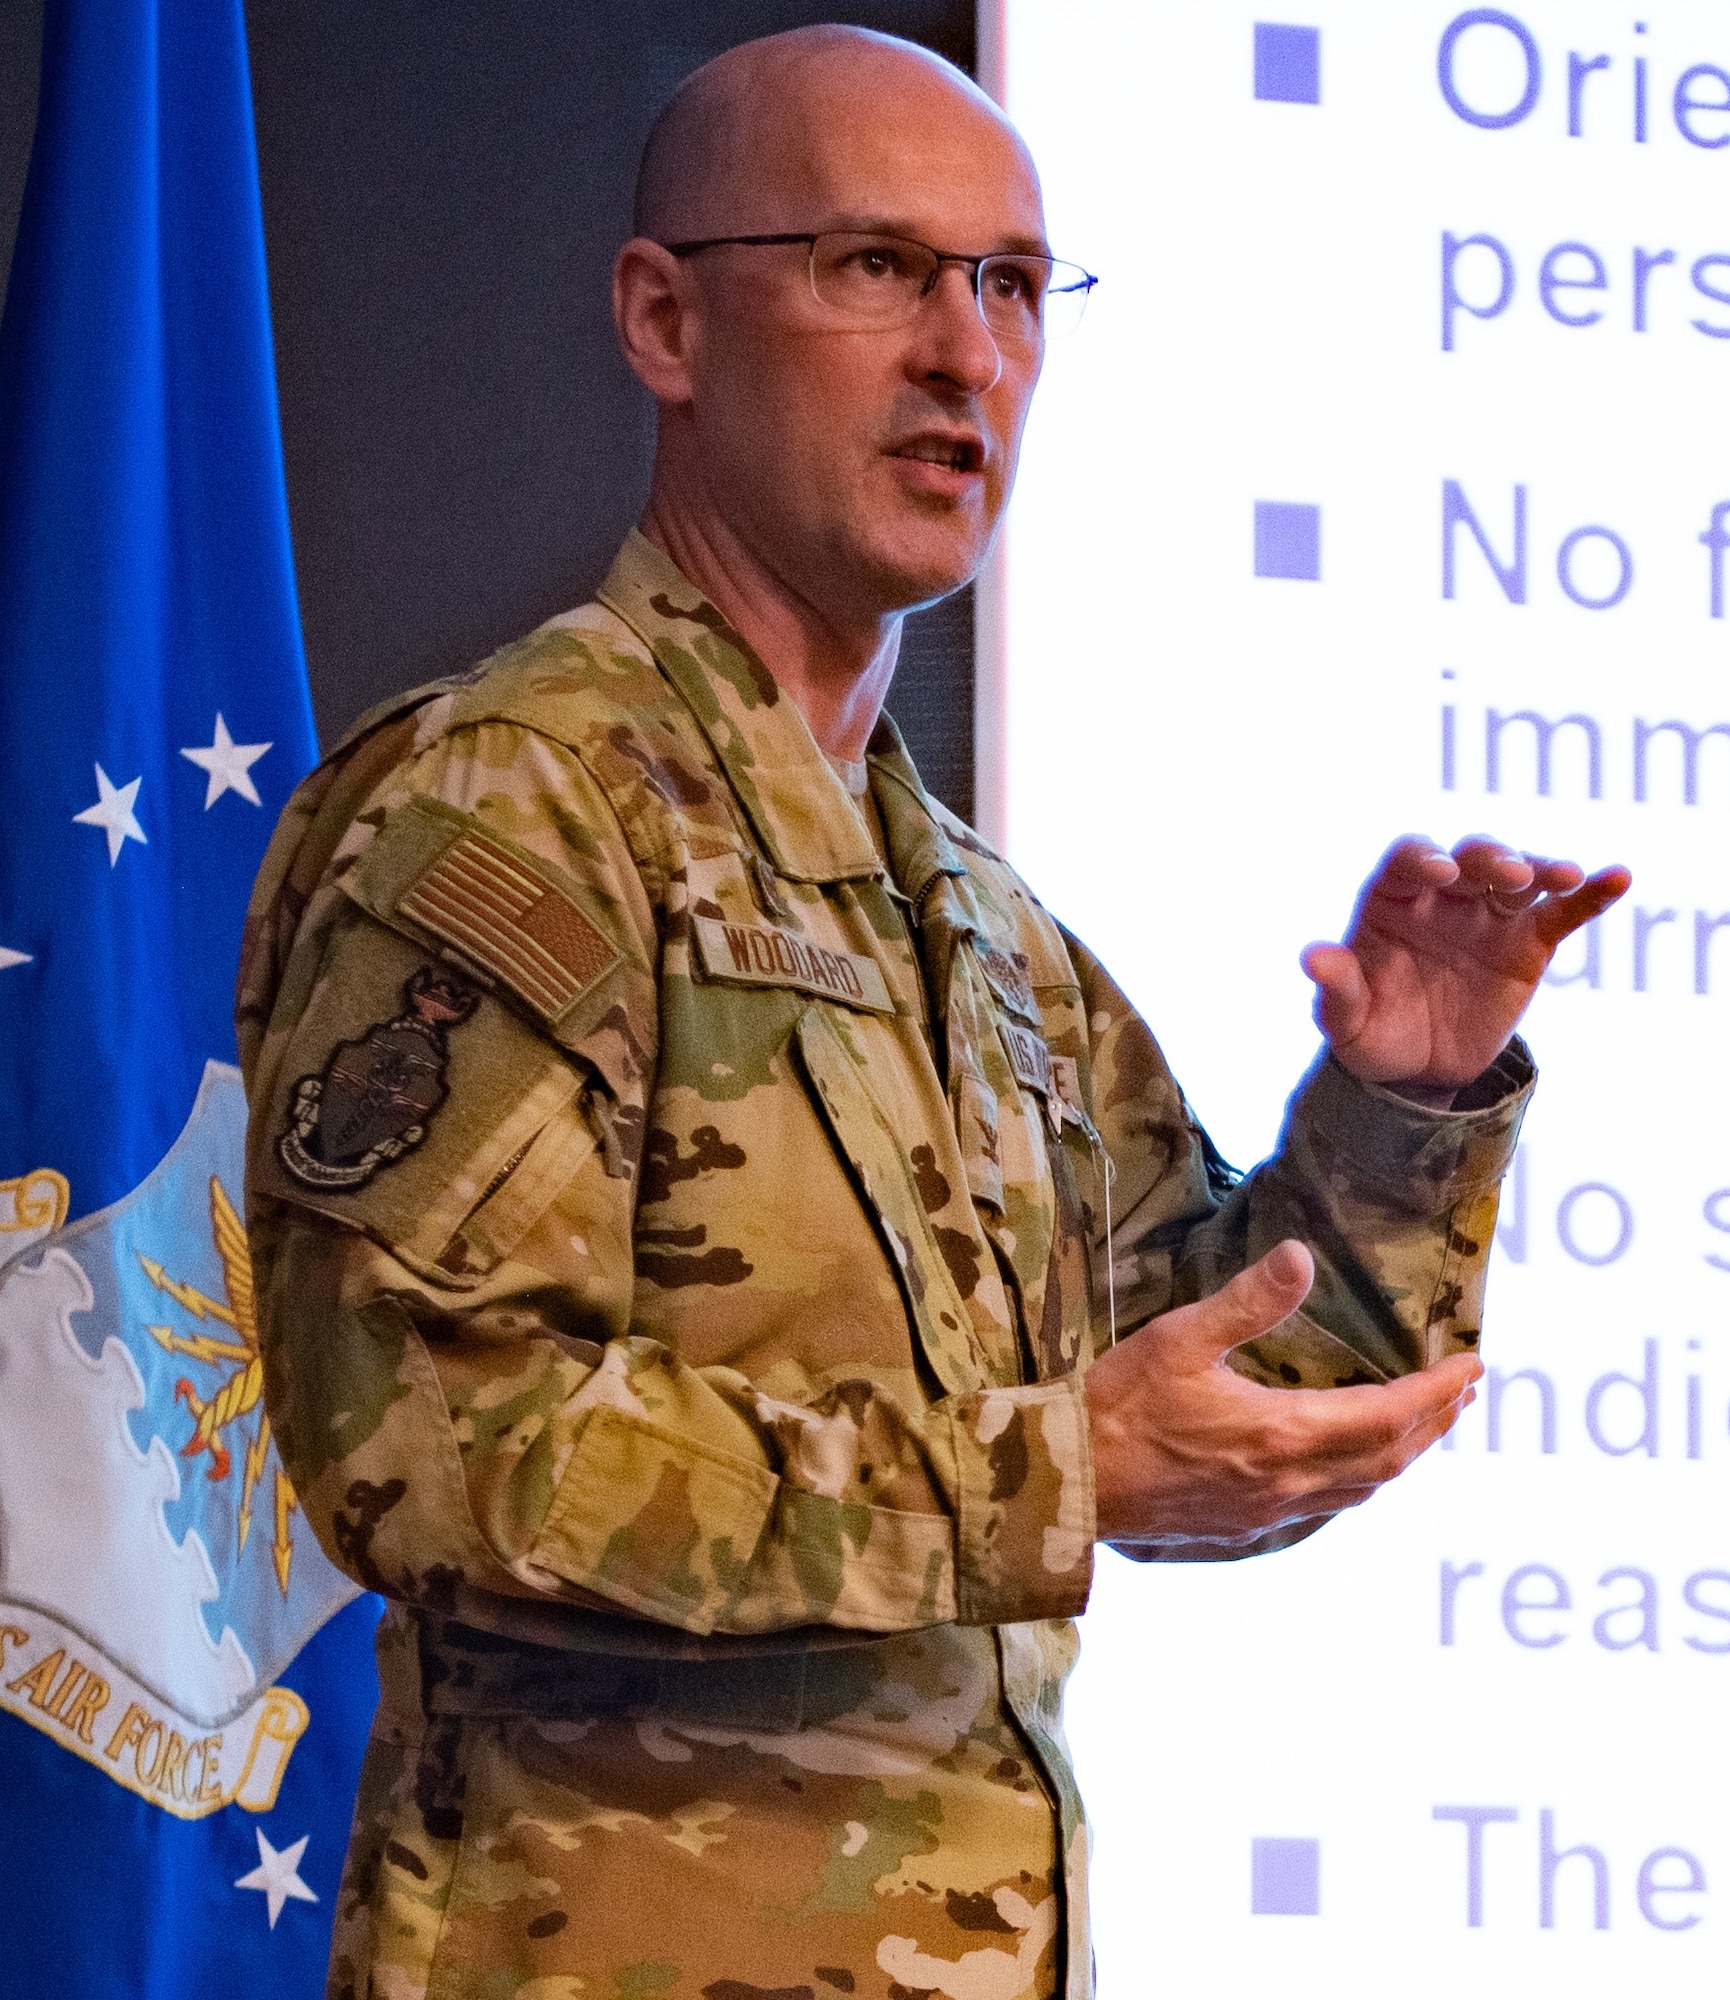 Col Troy Woodard, USAFSAM commander, answered questions from the audience during the SpOC Missile Community Cancer Study town hall. Members of the audience were able to have their questions and concerns addressed during the town hall which was held virtually and in person.